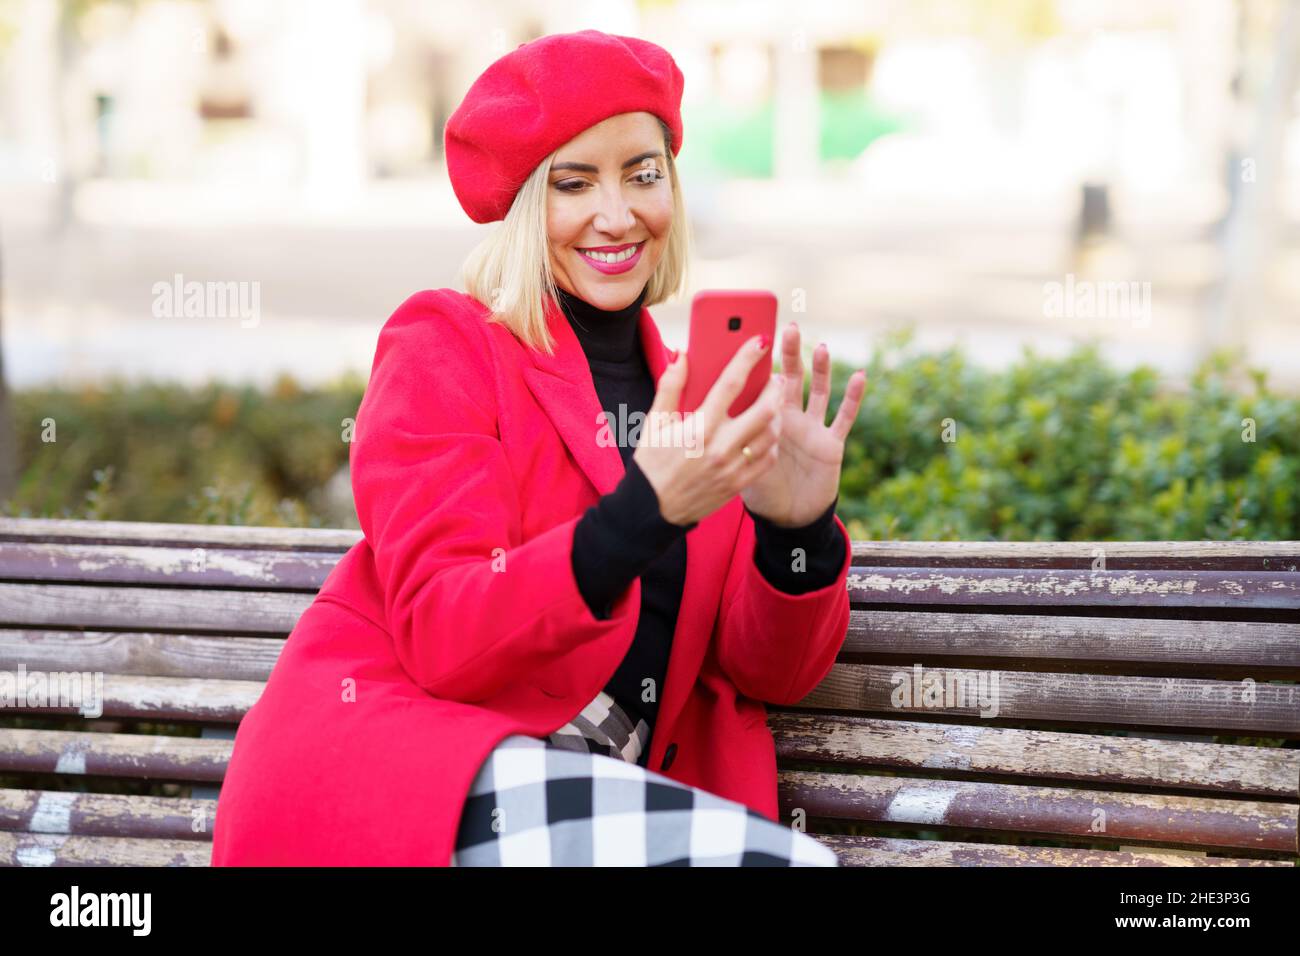 Middle-aged woman sitting on park bench using smartphone wearing red winter clothes. Stock Photo